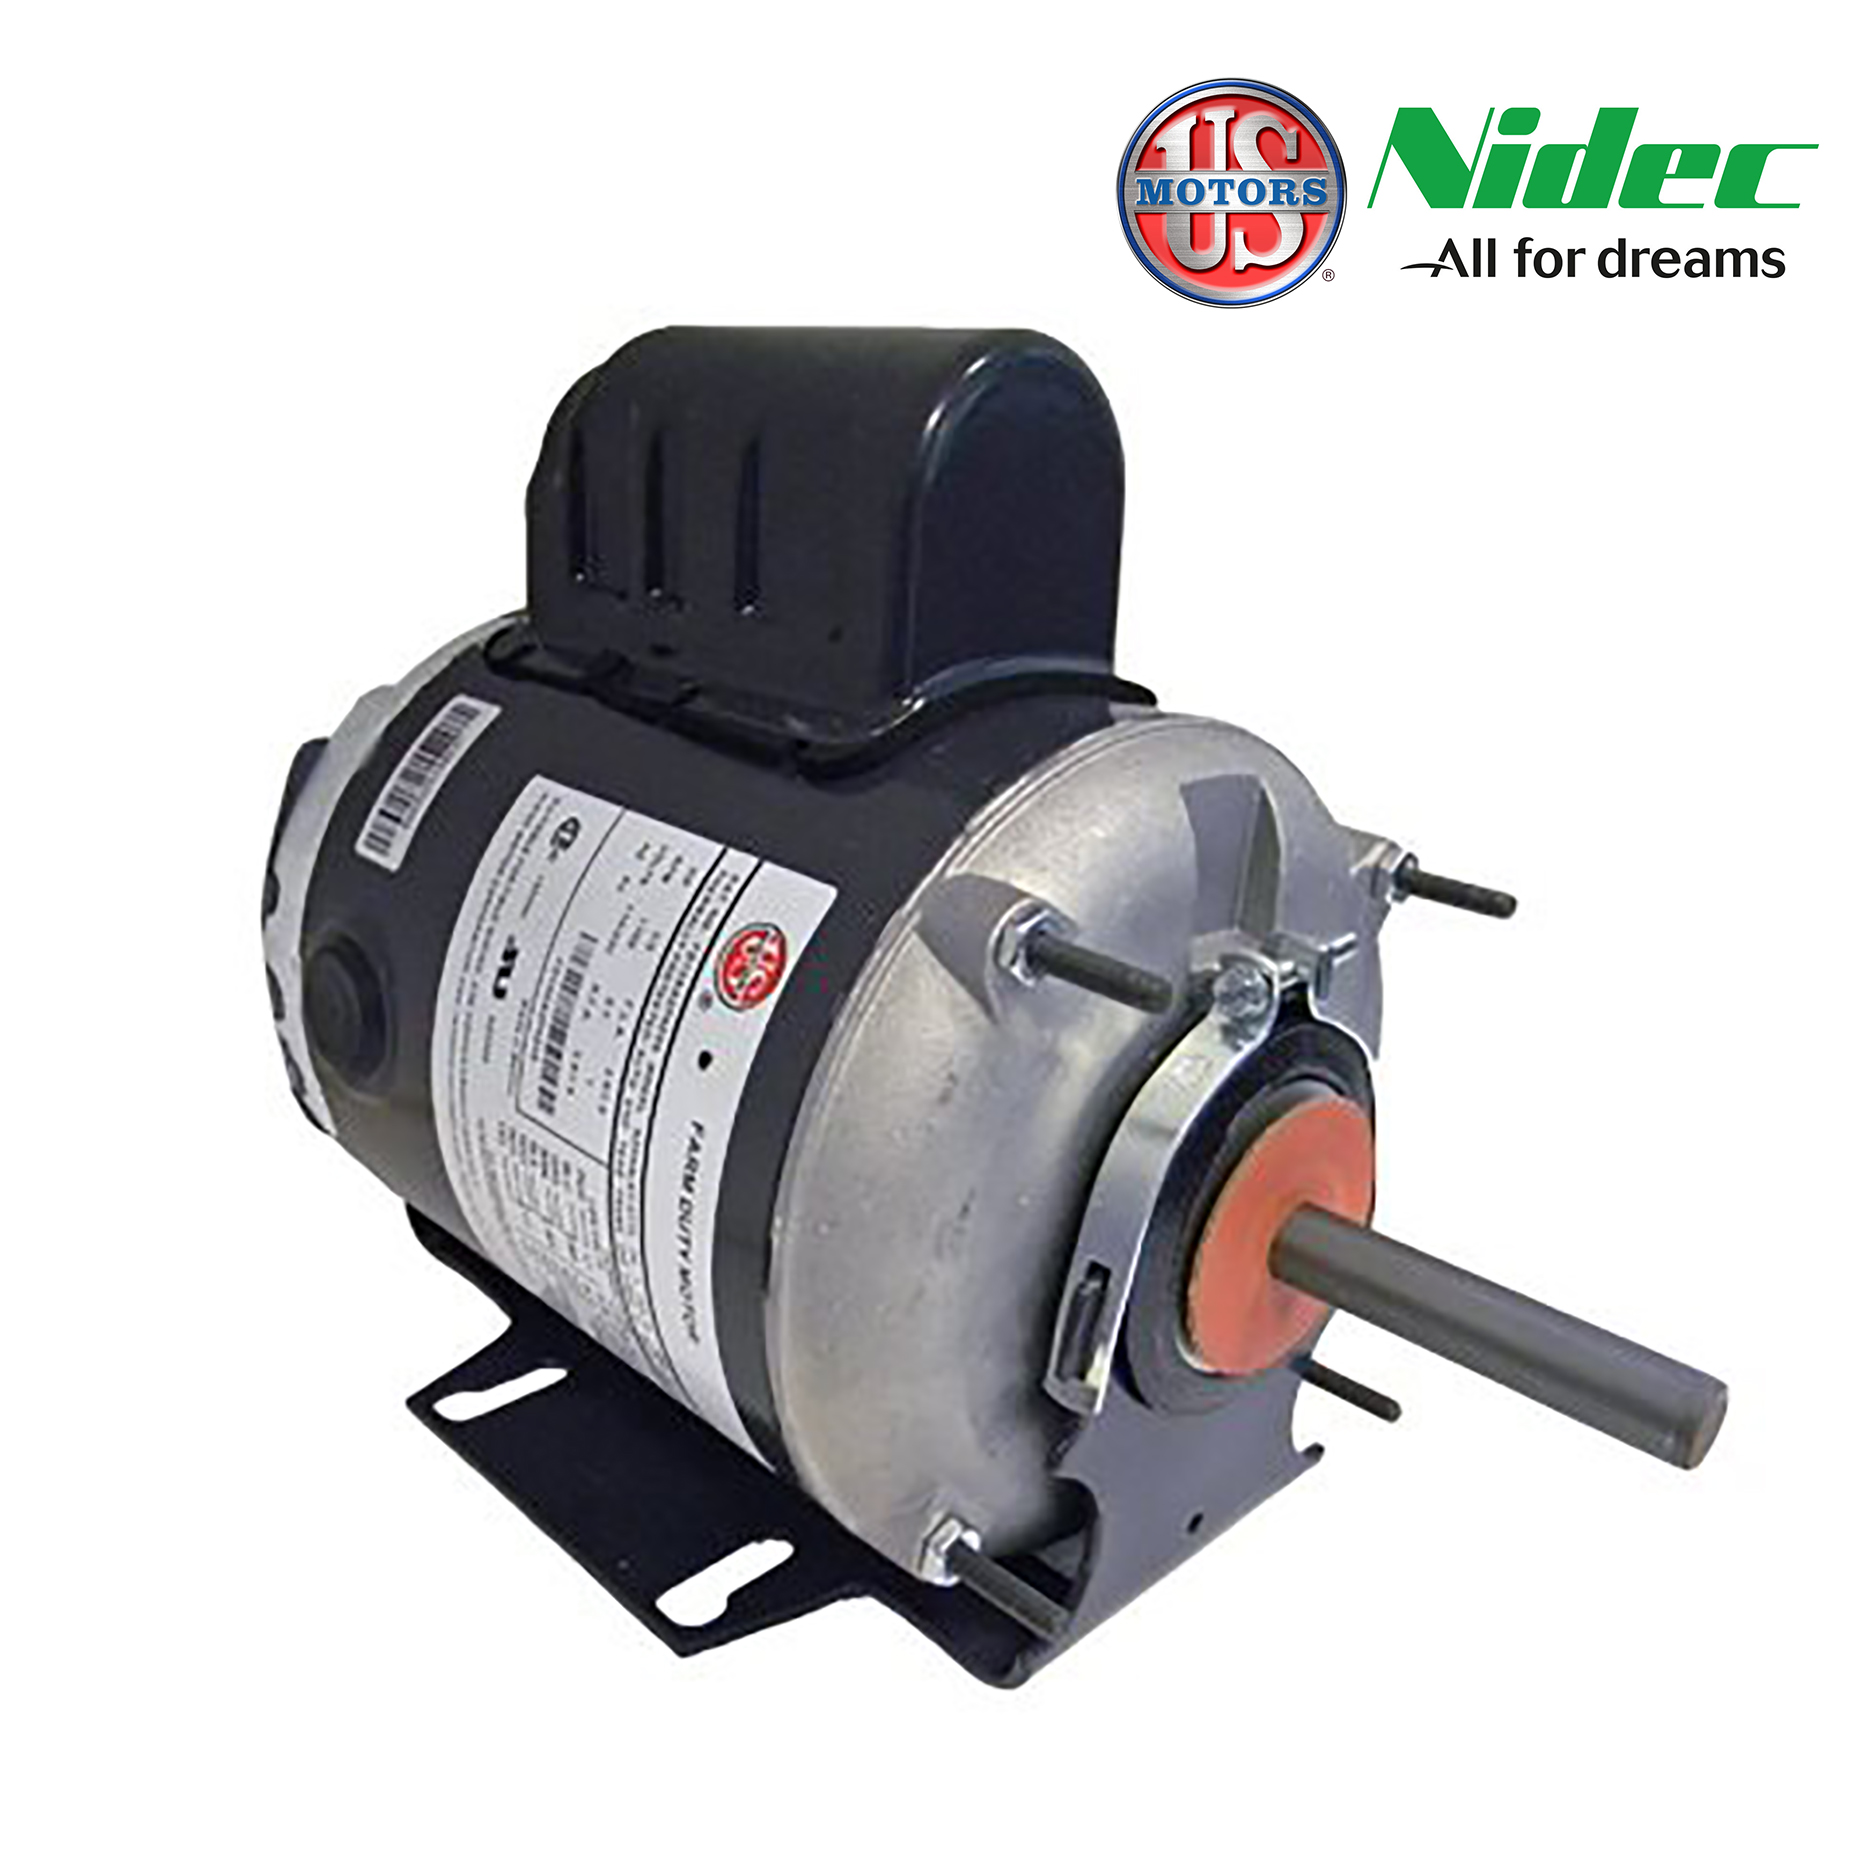 1/3HP 1800 115/230/1/60 TEAO 48YZ Poultry Fan Motors RESILIENT BASE STUDS MOUNTING PSC NO OVERLOAD 1.0SF